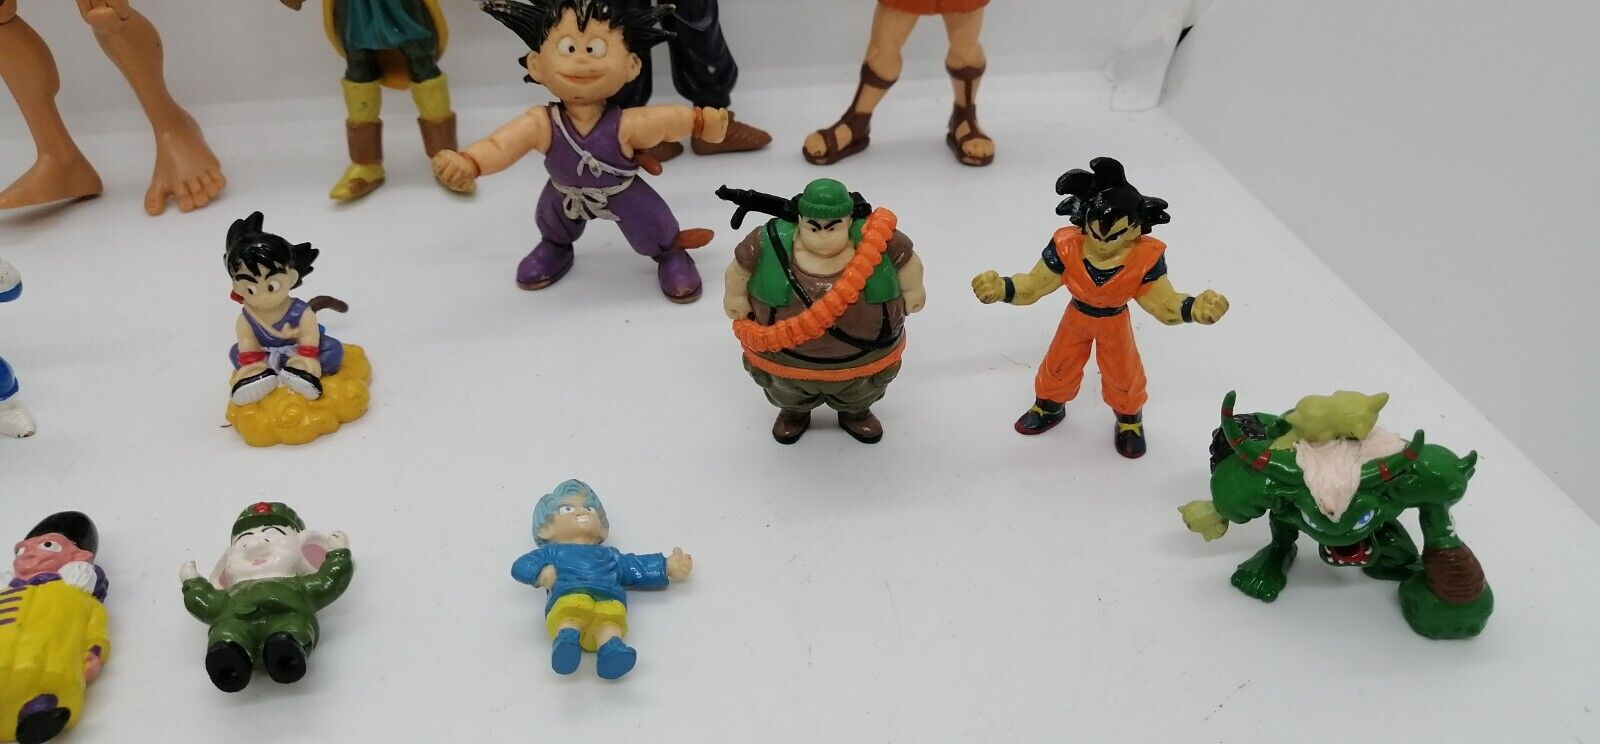 ::Job Lot 16 Vintage 1980s Dragon Ball BS/STA & Others  Action Figure 1.6" to 6.7"